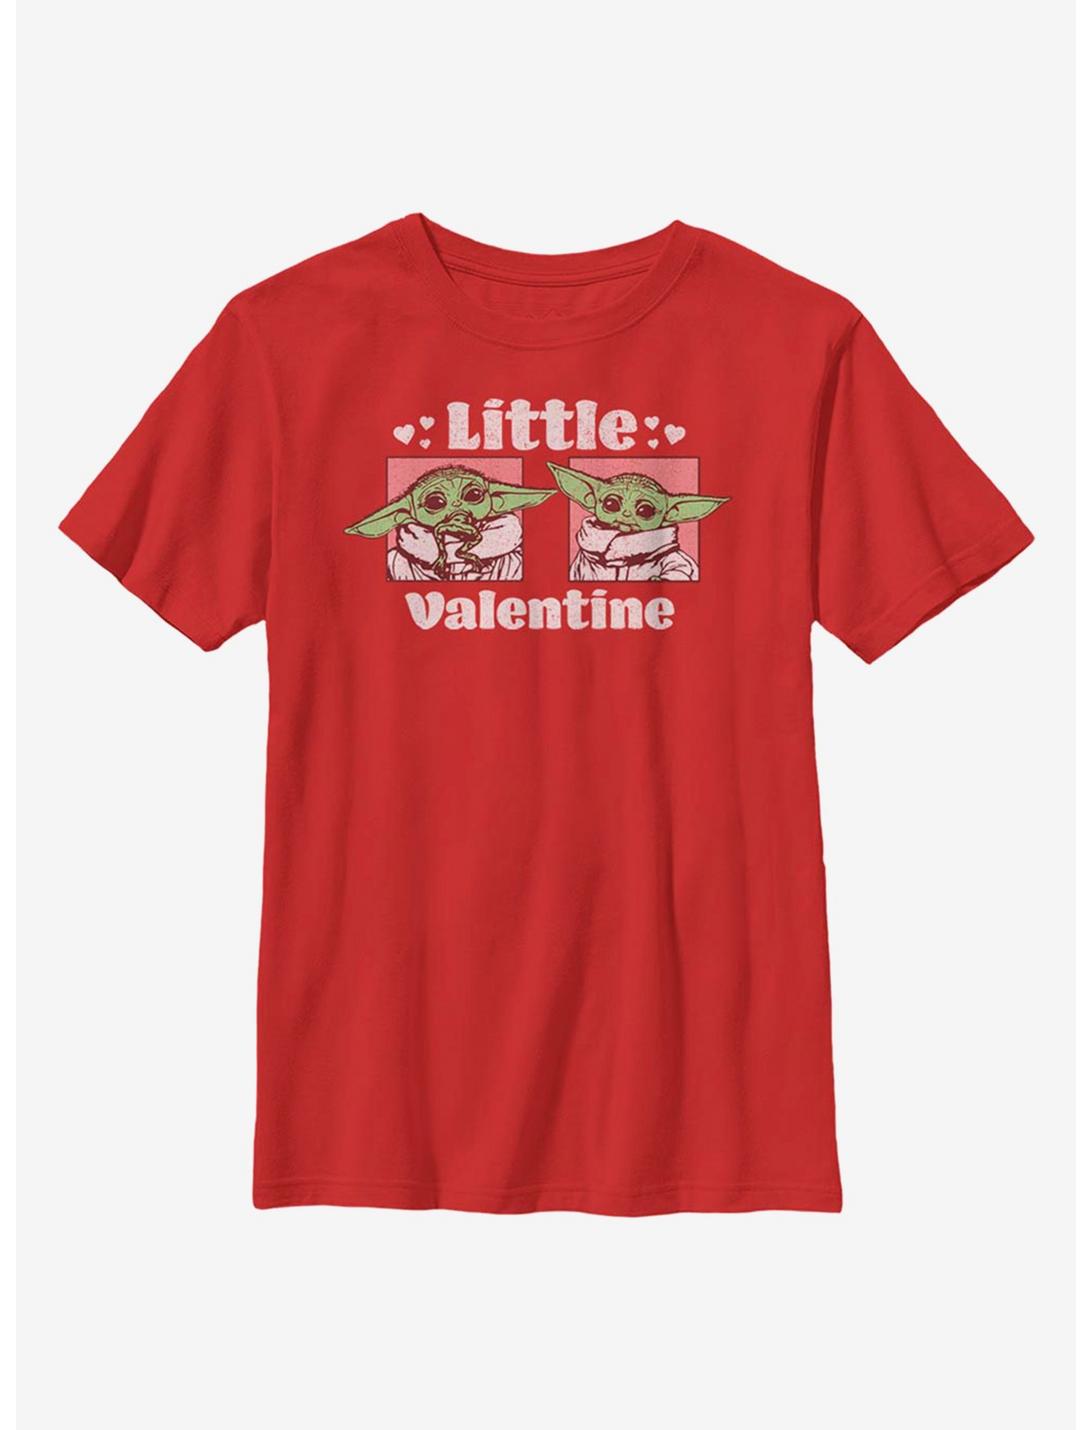 Star Wars The Mandalorian The Child Little Valentine Youth T-Shirt, RED, hi-res